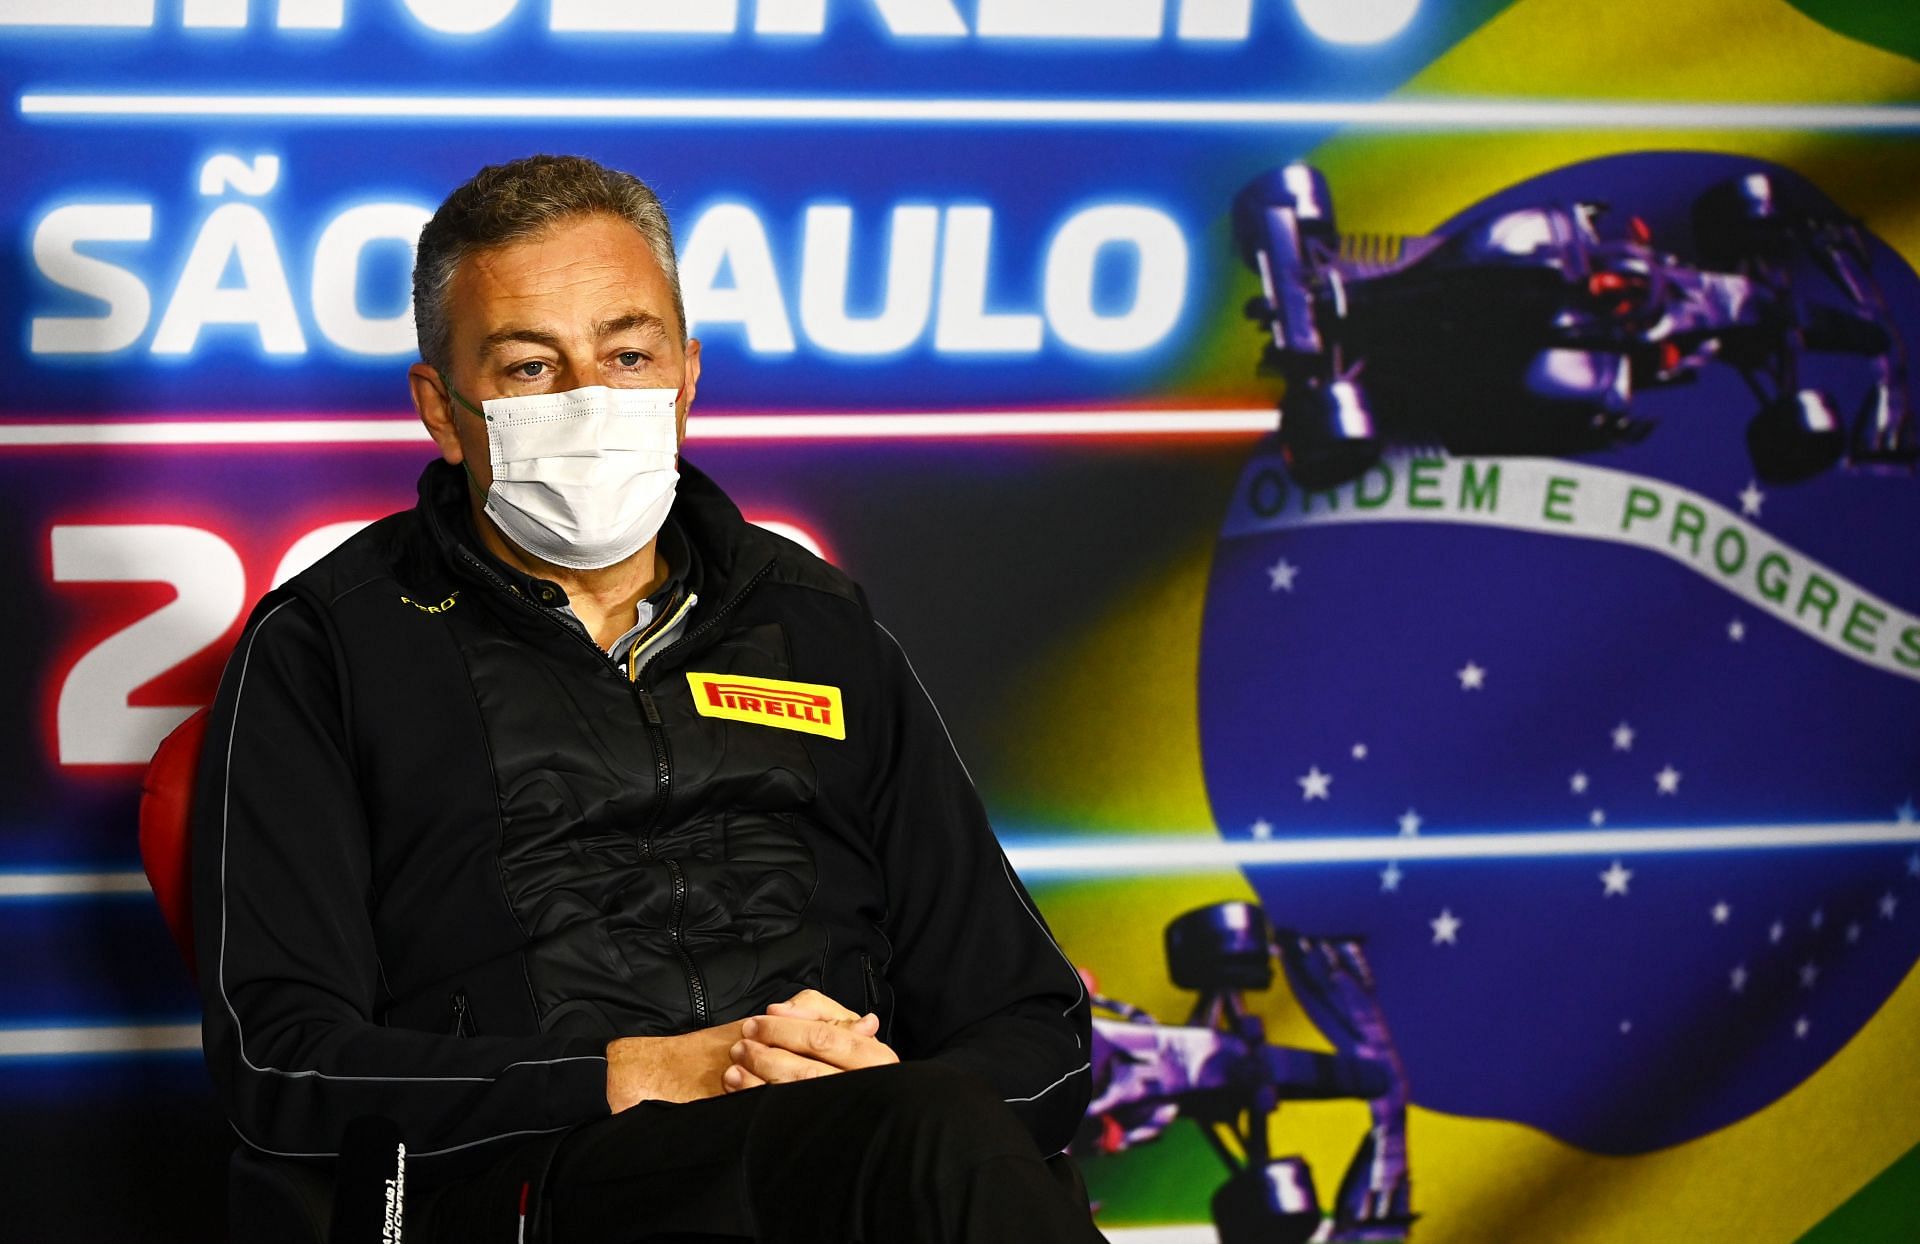 Pirelli boss Mario Isola in conversation during the 2021 Sao Paolo Grand Prix (Photo by Clive Mason/Getty Images)